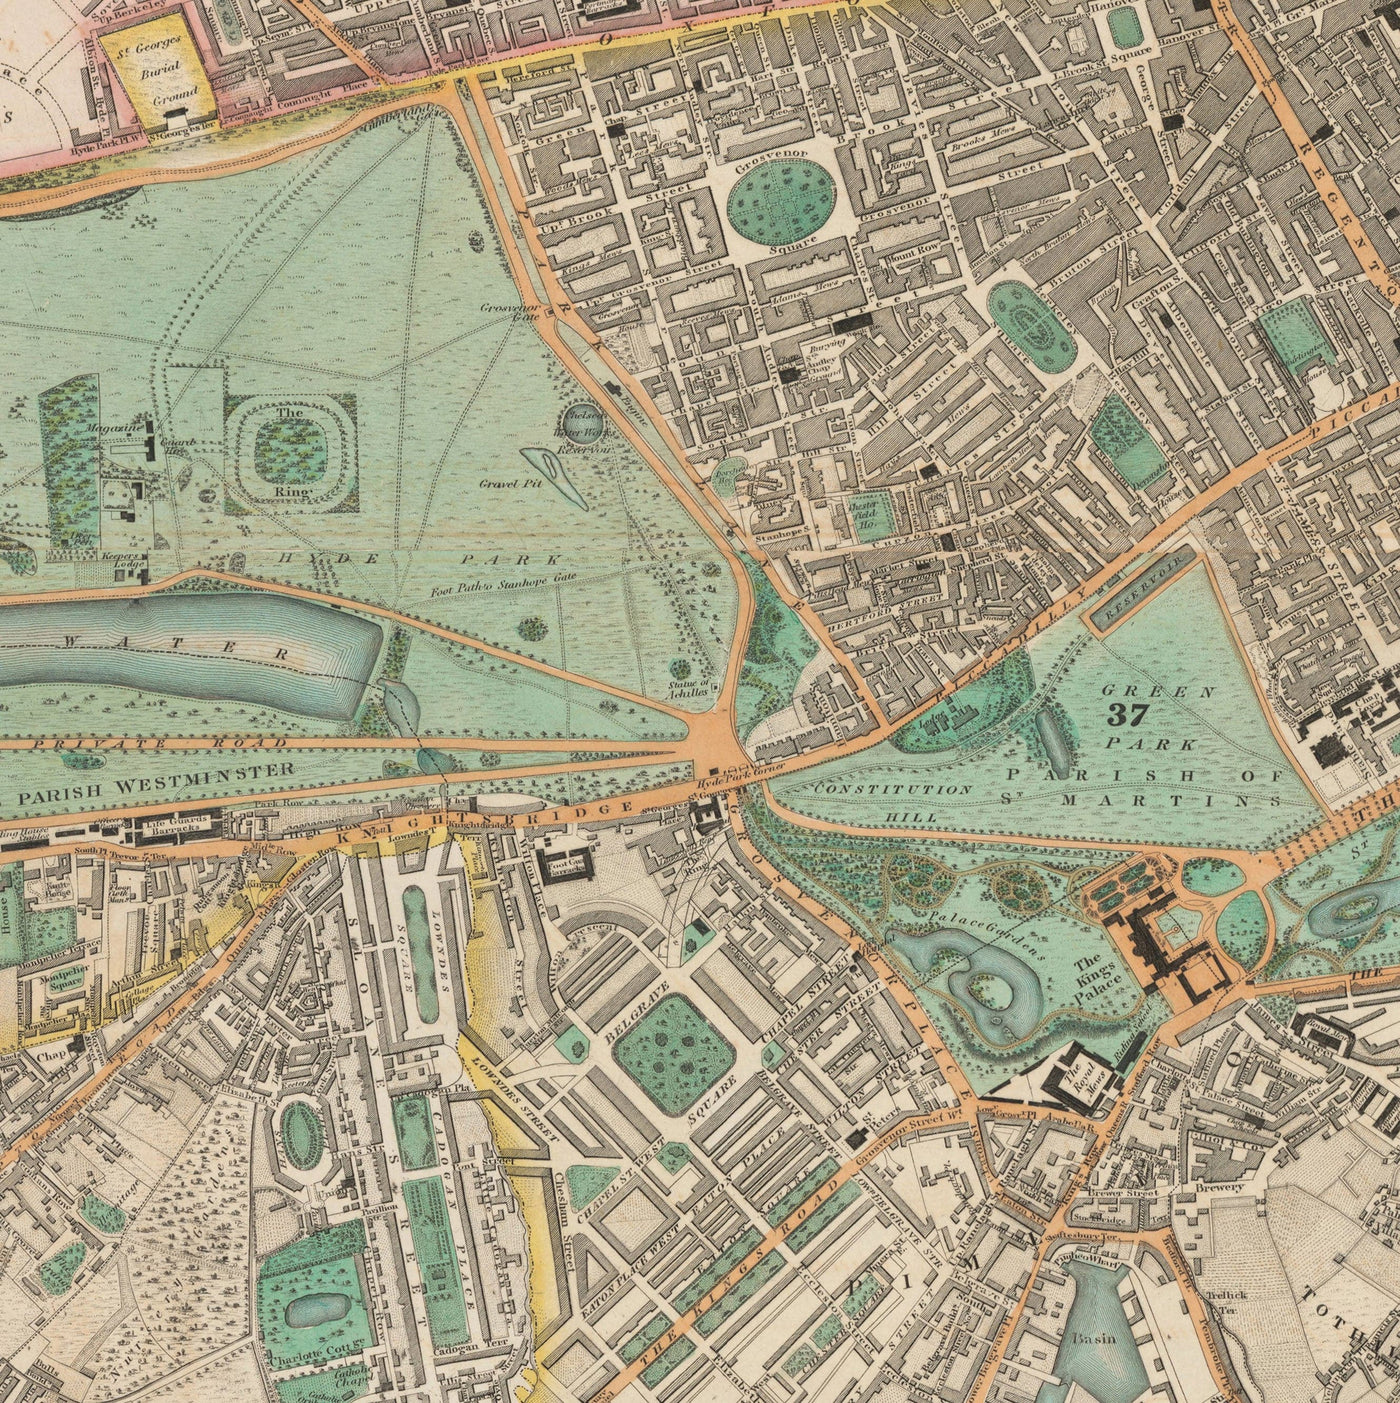 Big Old Map of London by C&J Greenwood, 1830 - Handcoloured